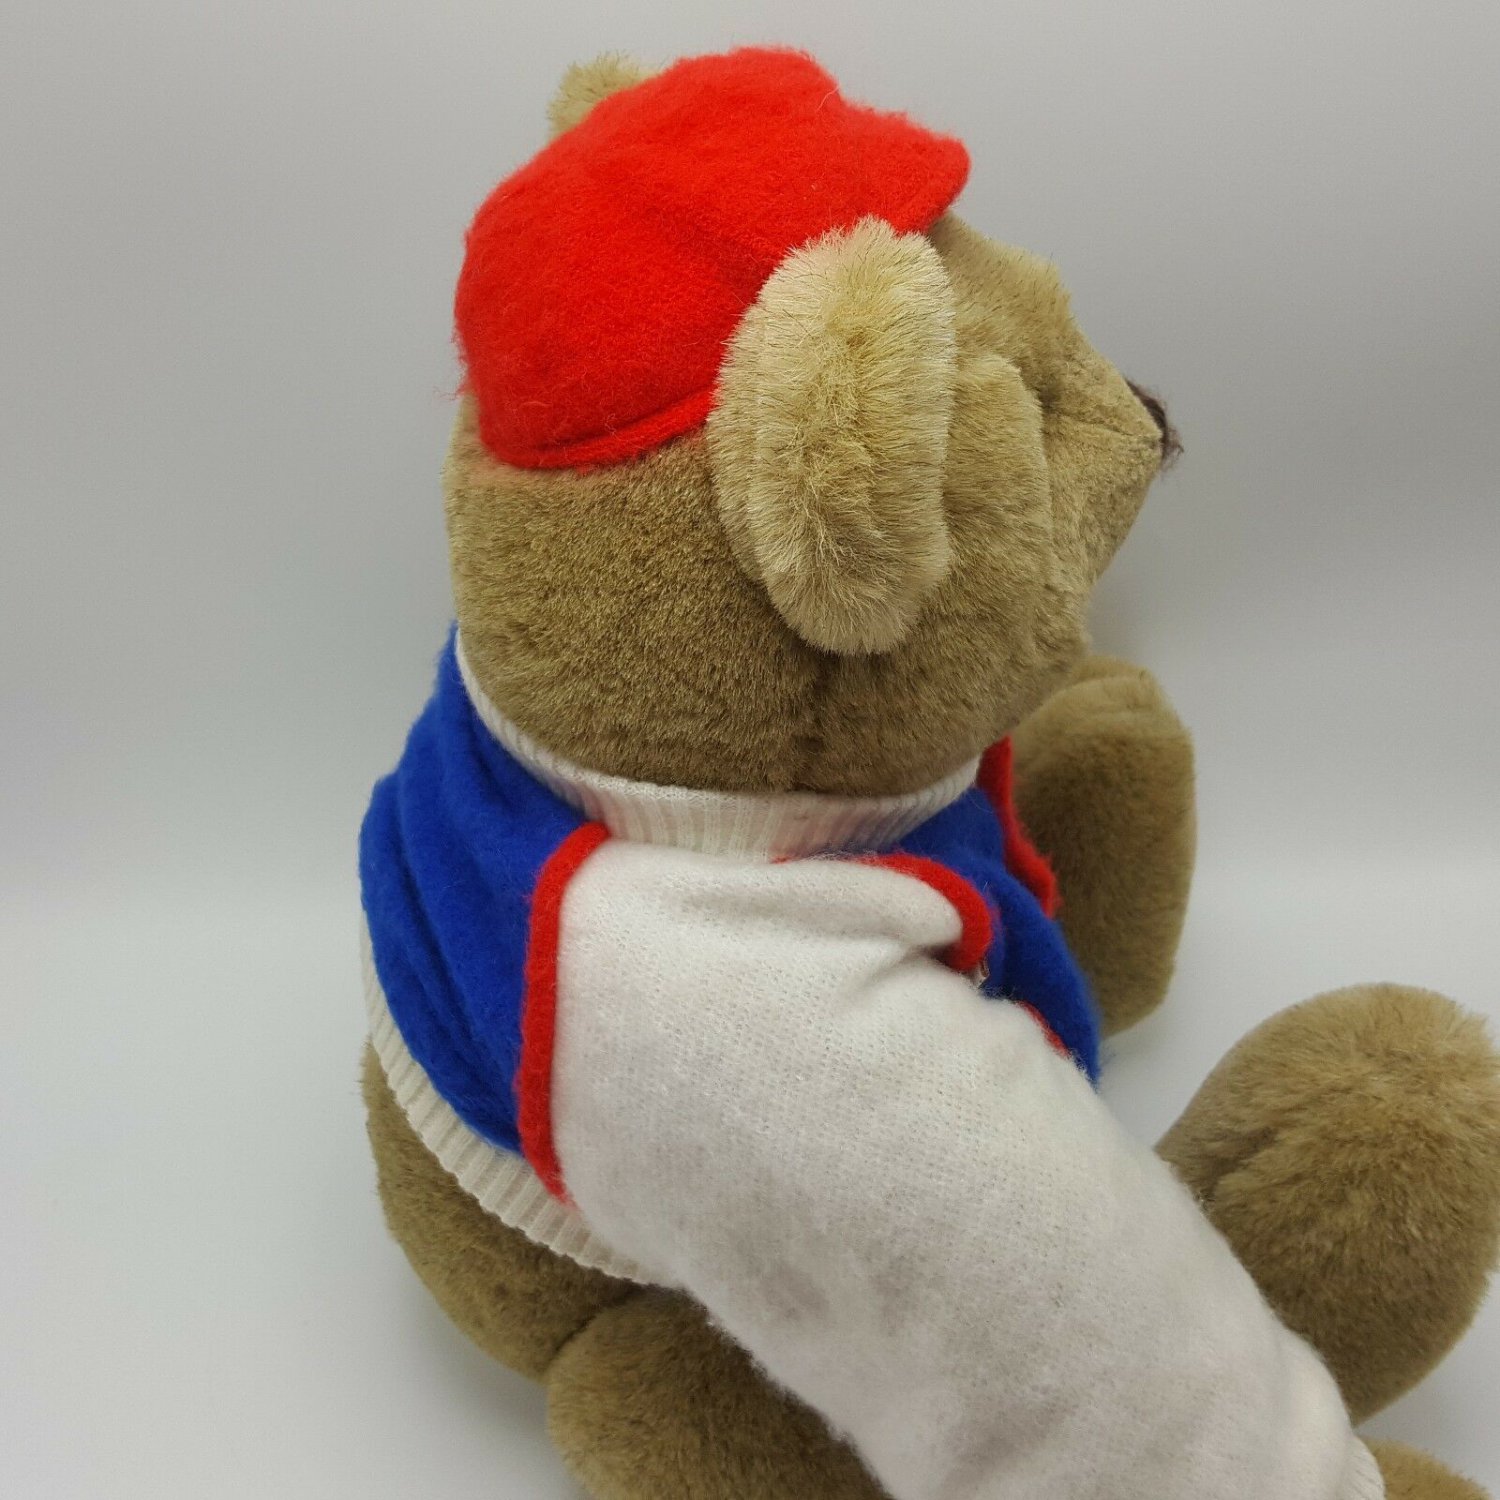 Bialosky Bear Teddy Jointed Gund 1982 Red White Blue Sweater Jacket 17 ...